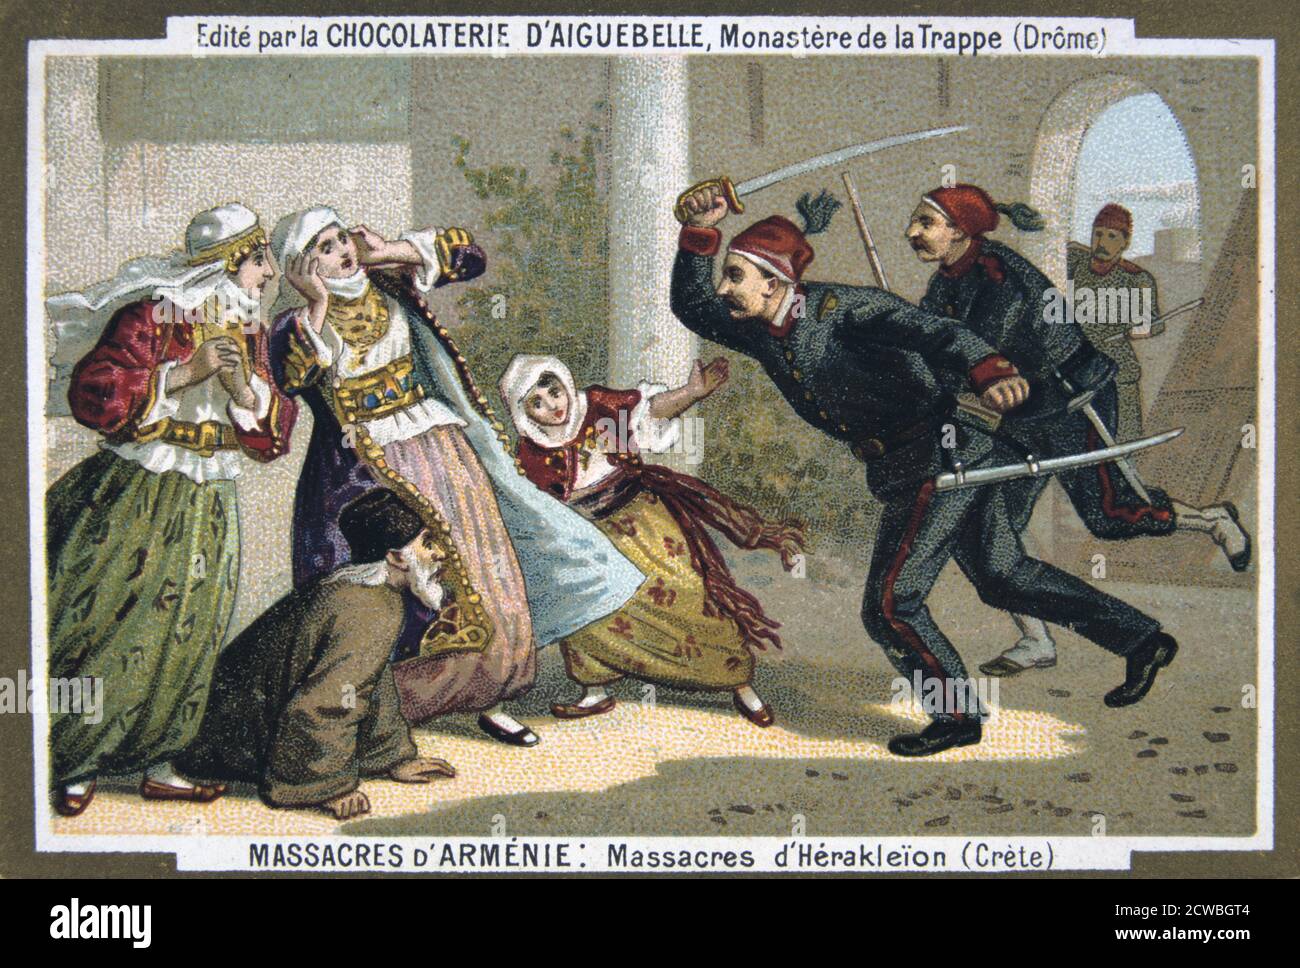 Massacres of Heraklion (Crete), 1895. Eurocentric portrayal of historical events - scene from the Massacres of Armenia card series produced by the chocolate factory at the Monastery of Aiguebelle. Stock Photo